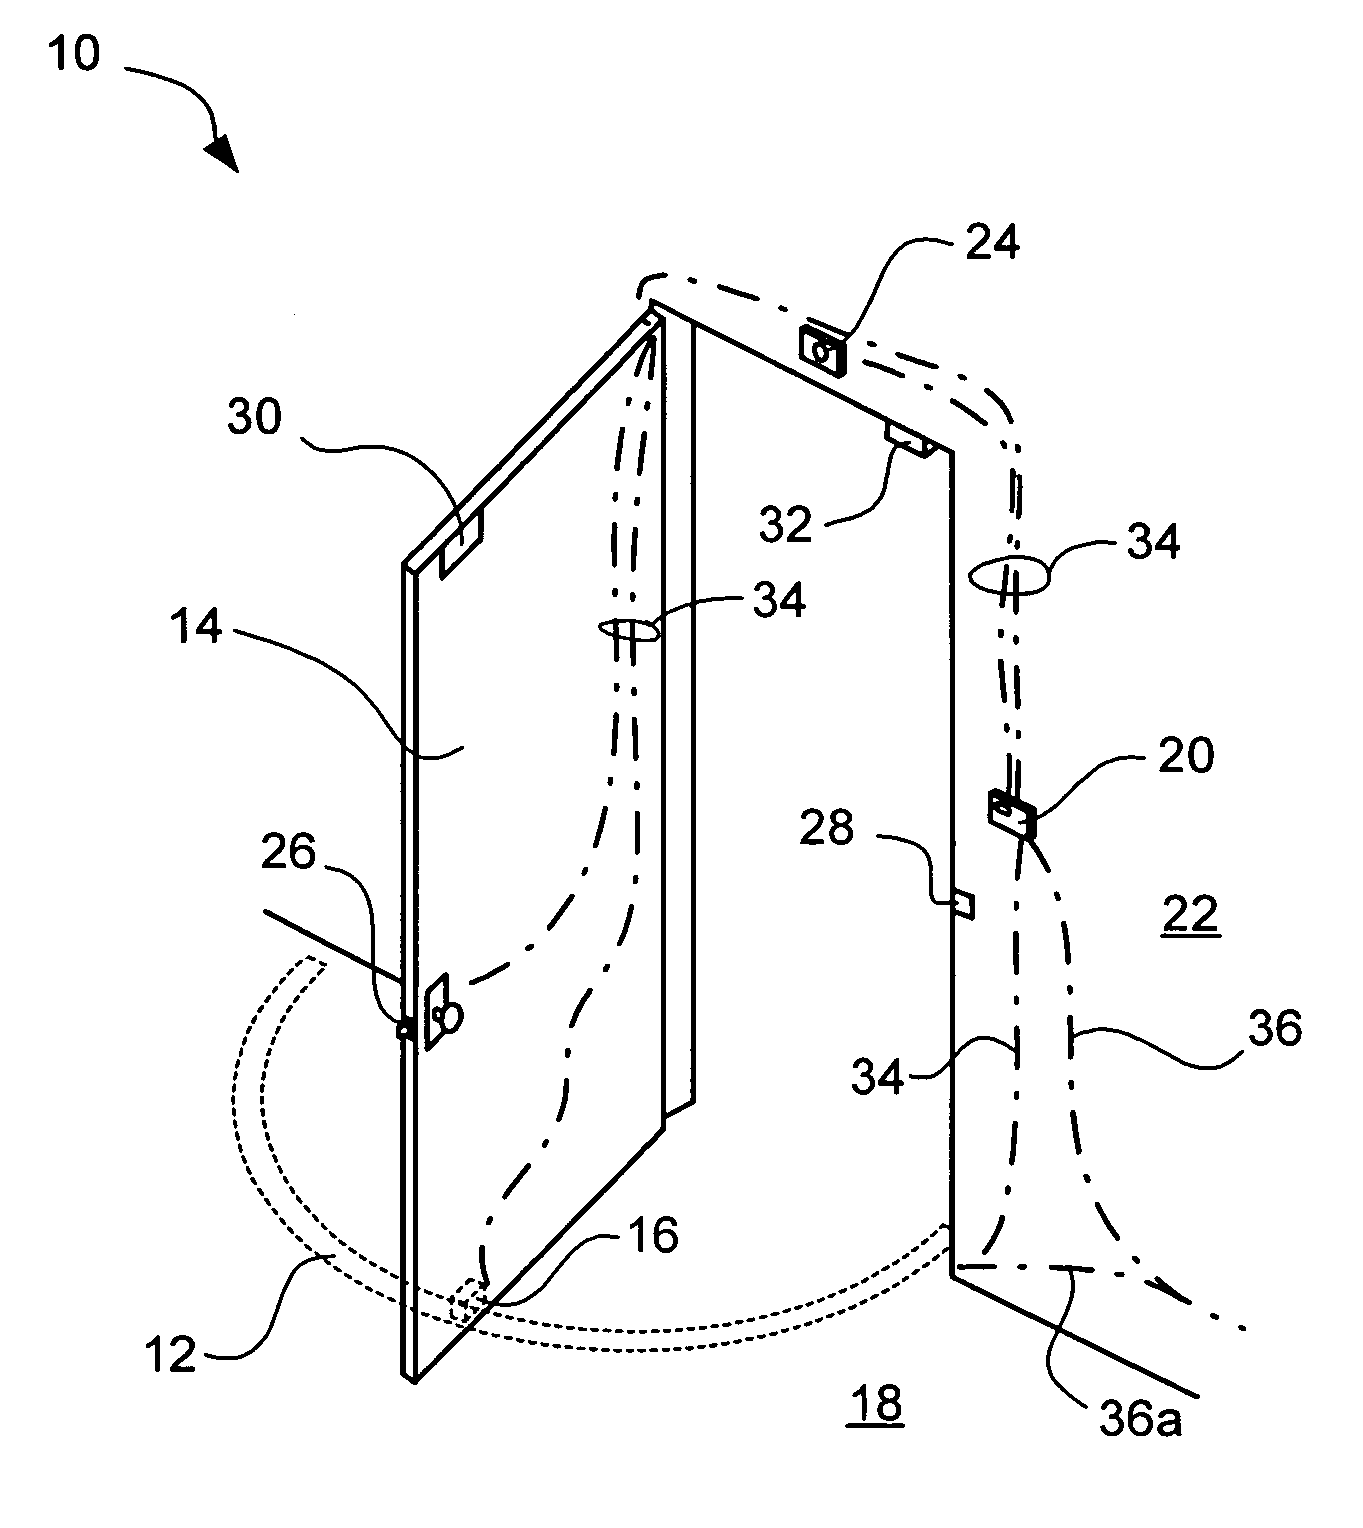 Electromagnetic door actuator system and method